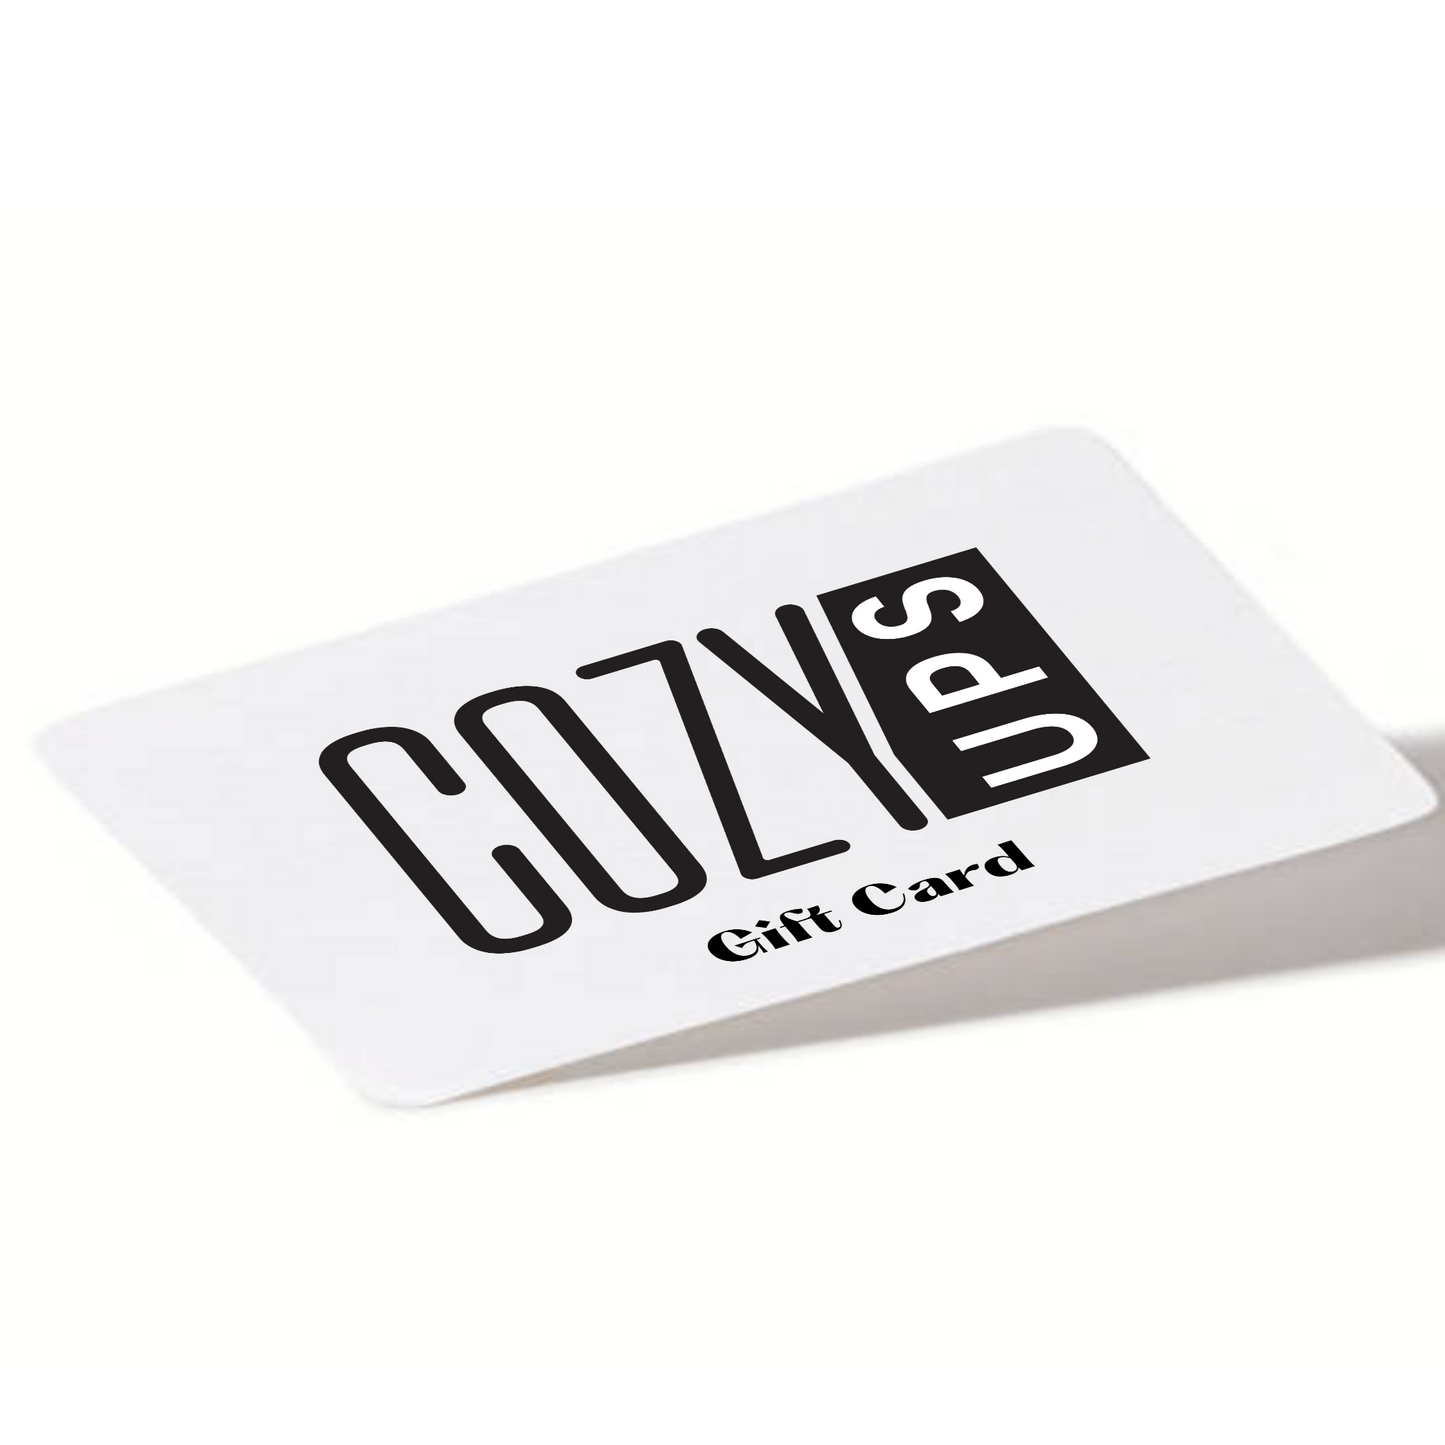 Cozy Ups Gift Cards